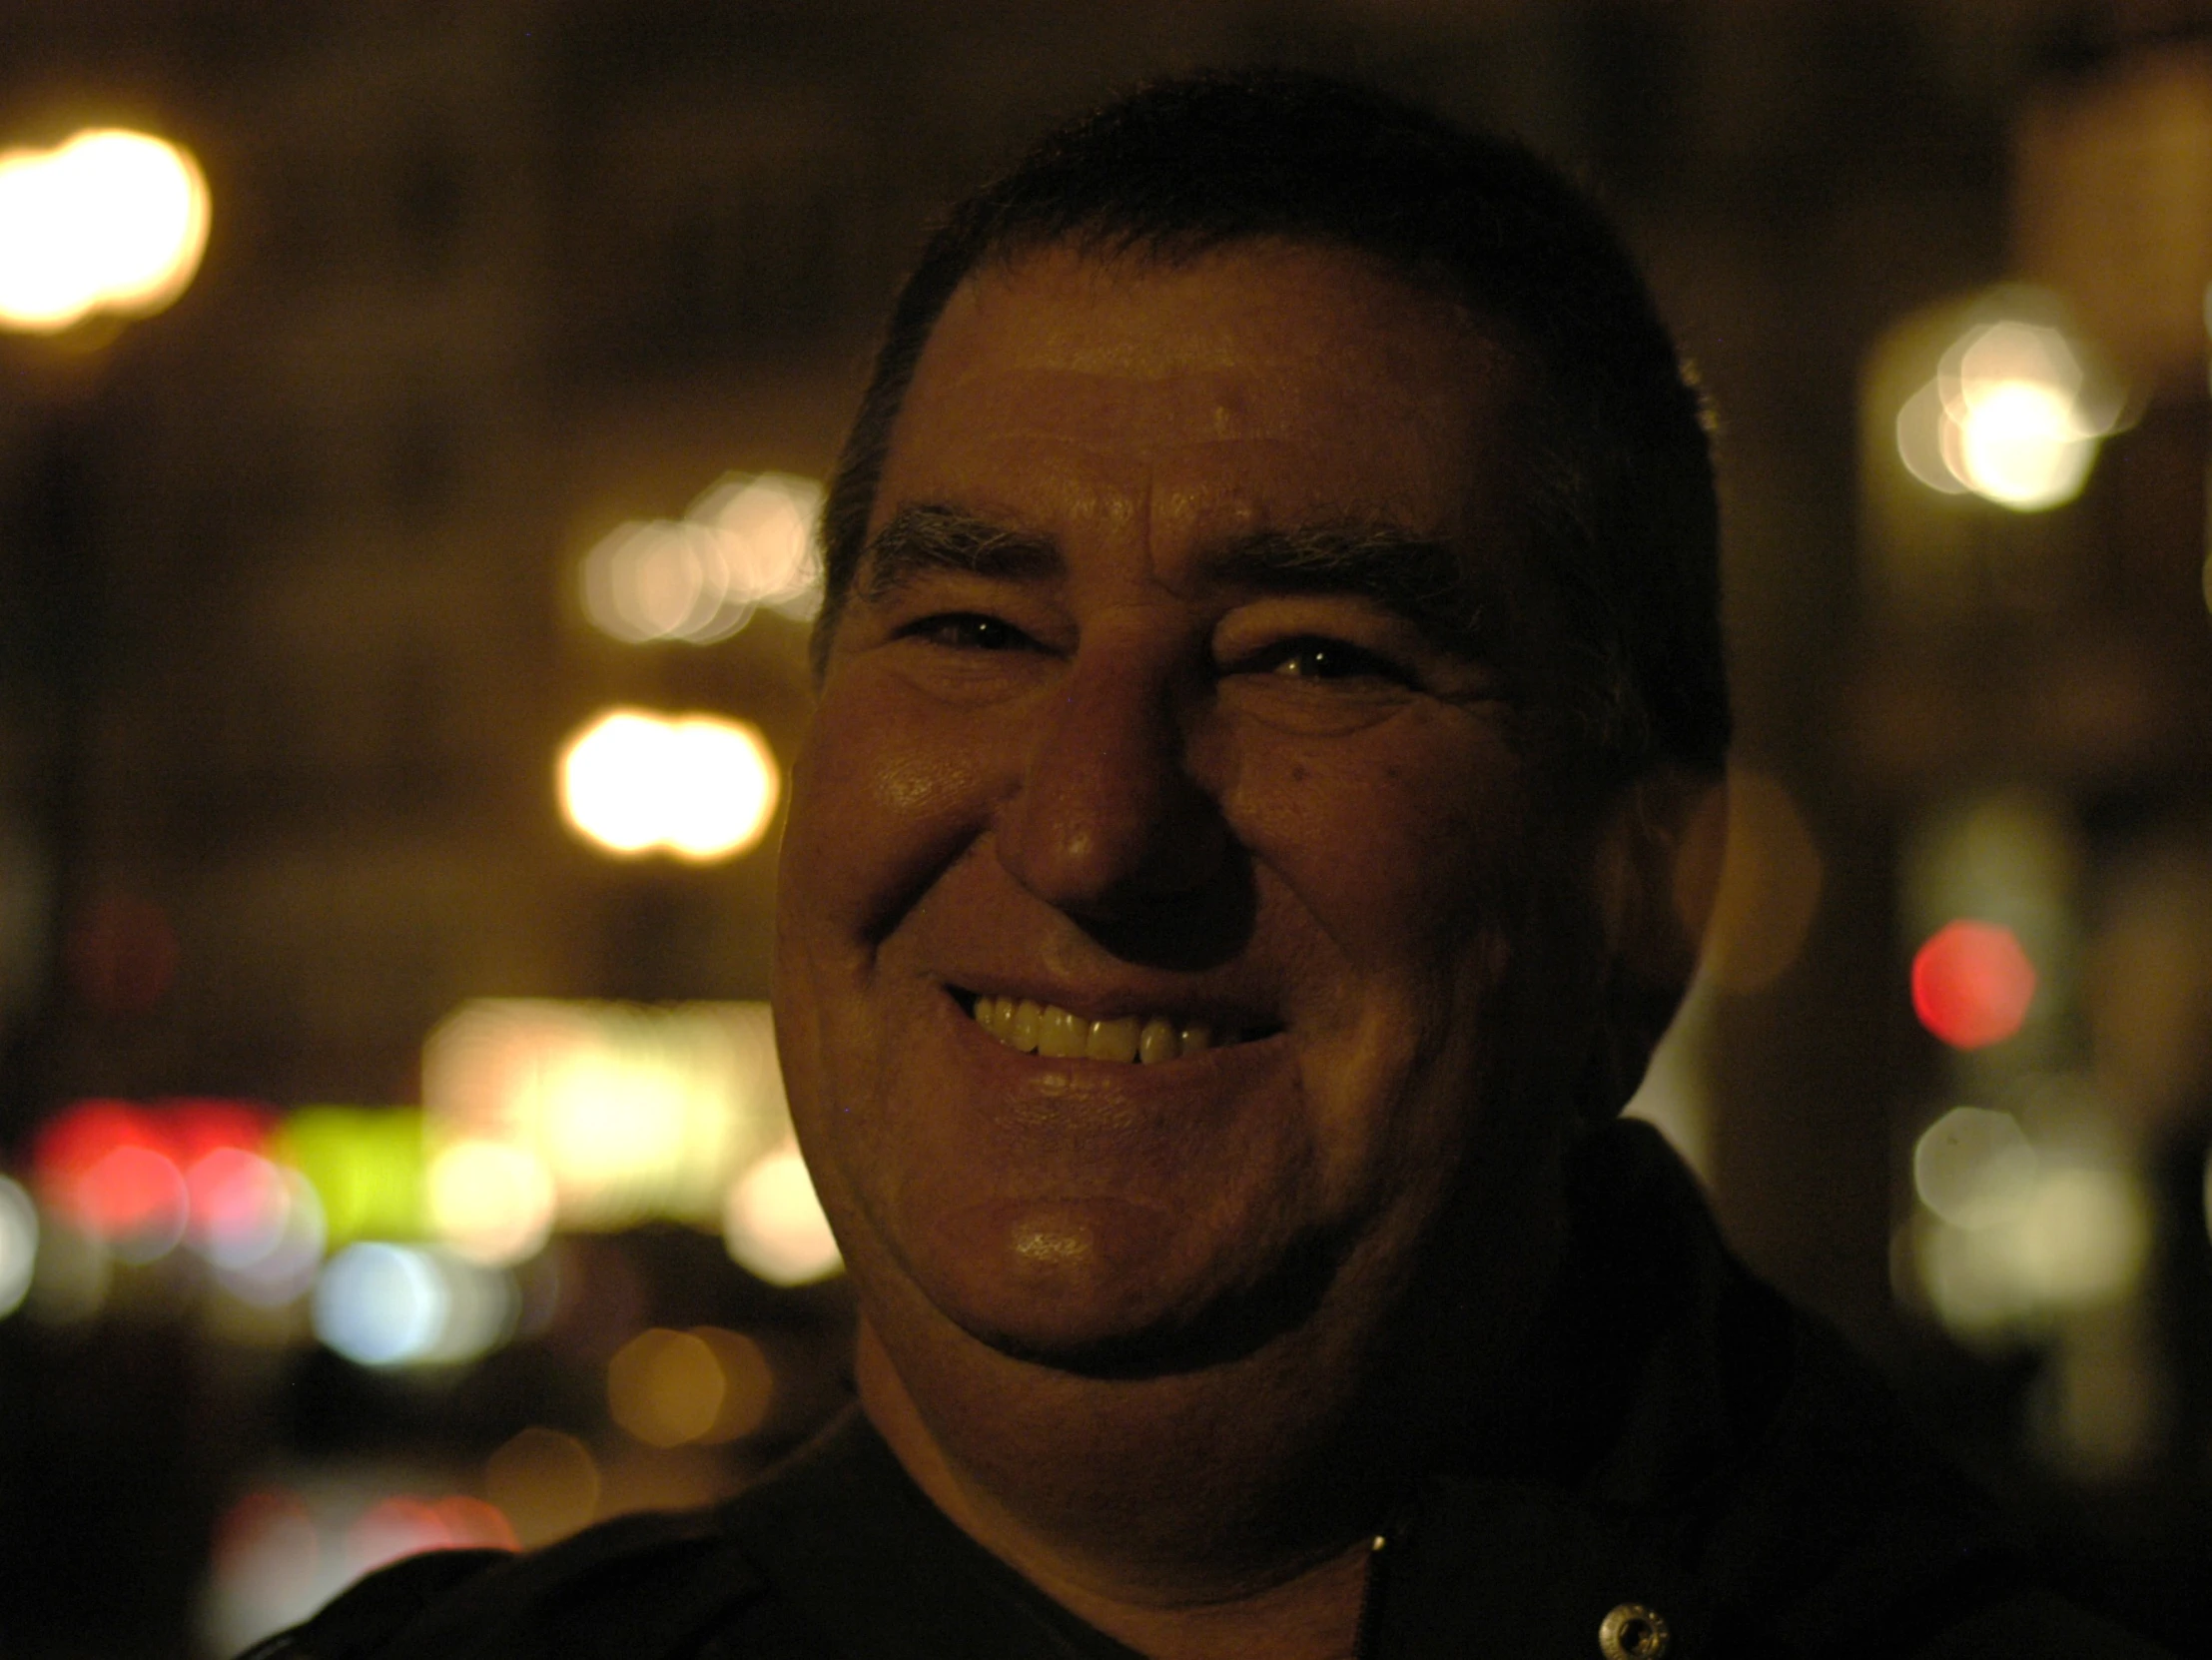 a man smiles while posing for a picture in front of lights